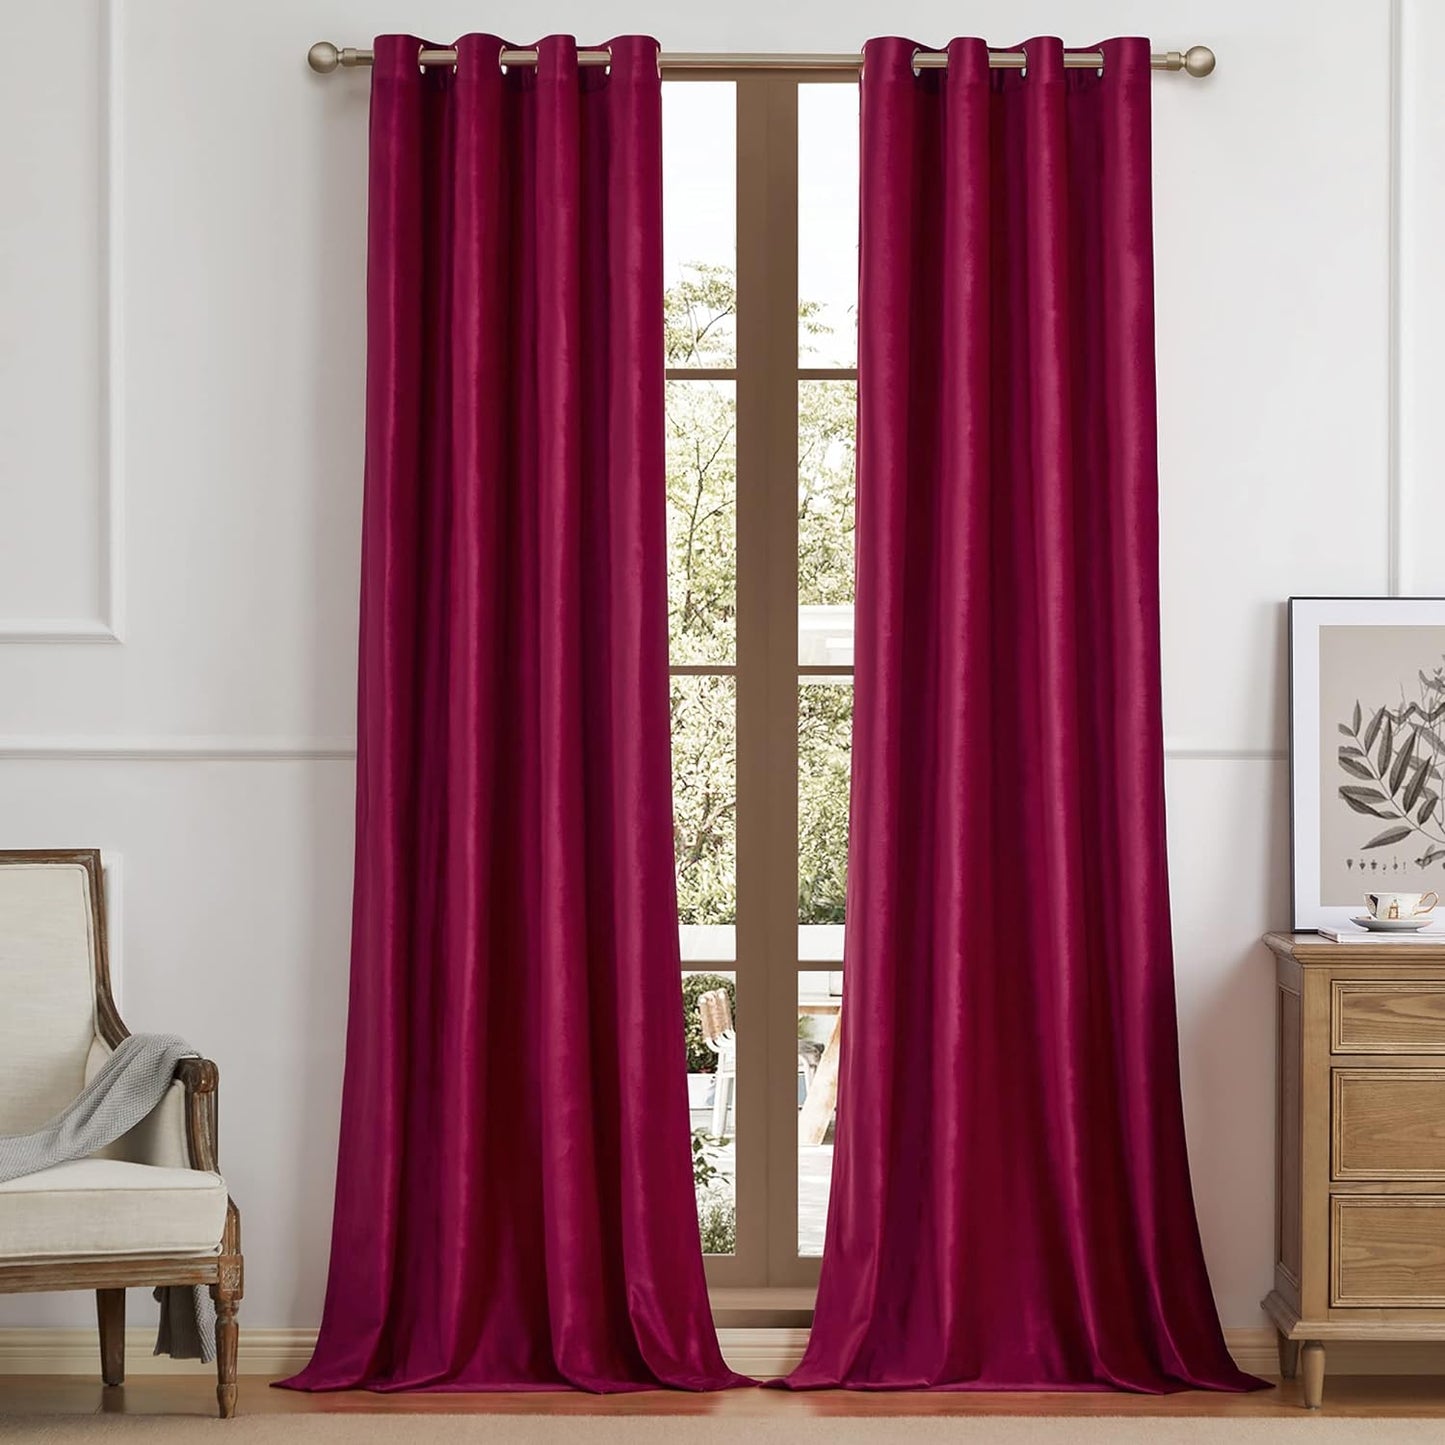 BULBUL Velvet Gold Curtains 84 Inch Length- Living Room Blackout Thermal Window Drapes Darkening Decor Grommet Curtains for Bedroom Set of 2 Panels  BULBUL Ruby Red 52"W X 90"L 